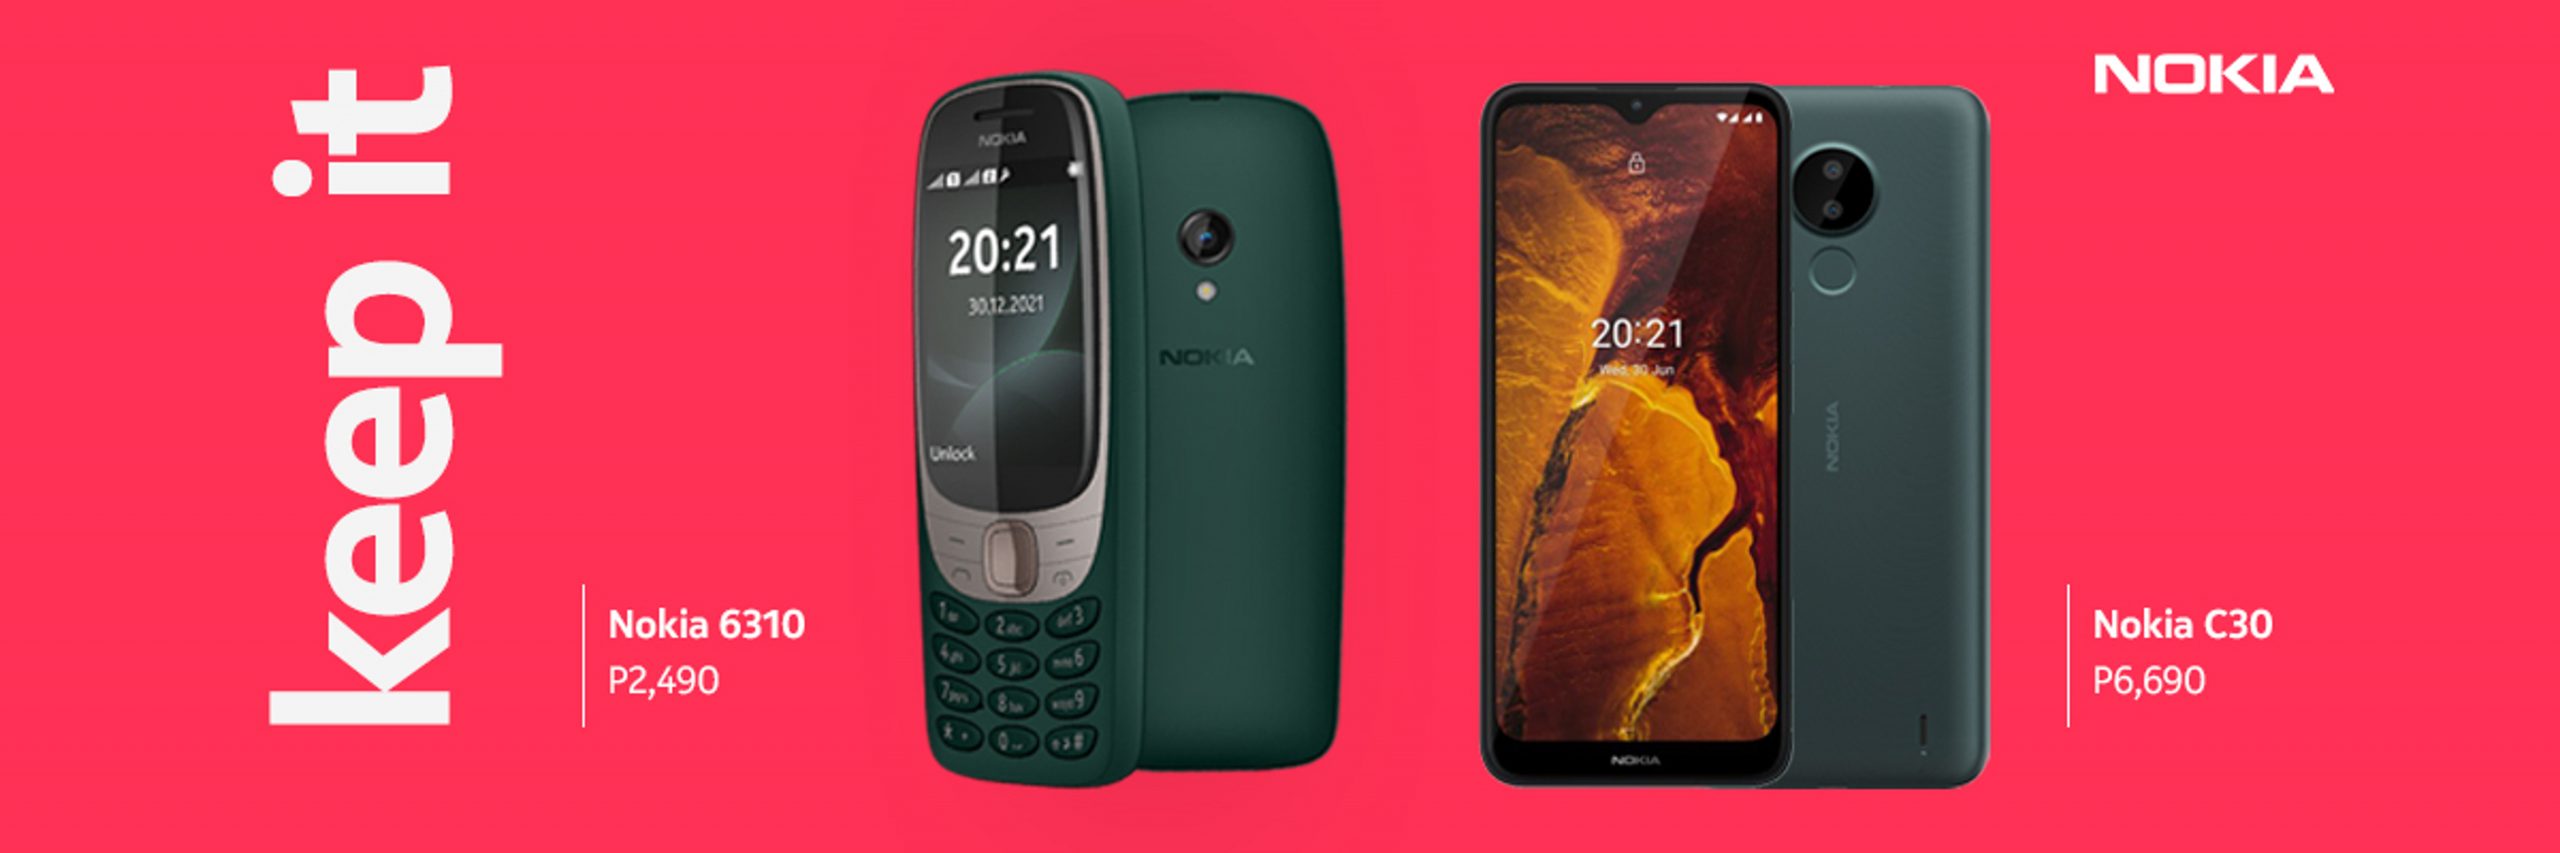 Nokia mobile expands #LoveTrustKeep series in PH: Nokia C30 delivers three-day battery life and the Nokia 6310 boasts revamped features